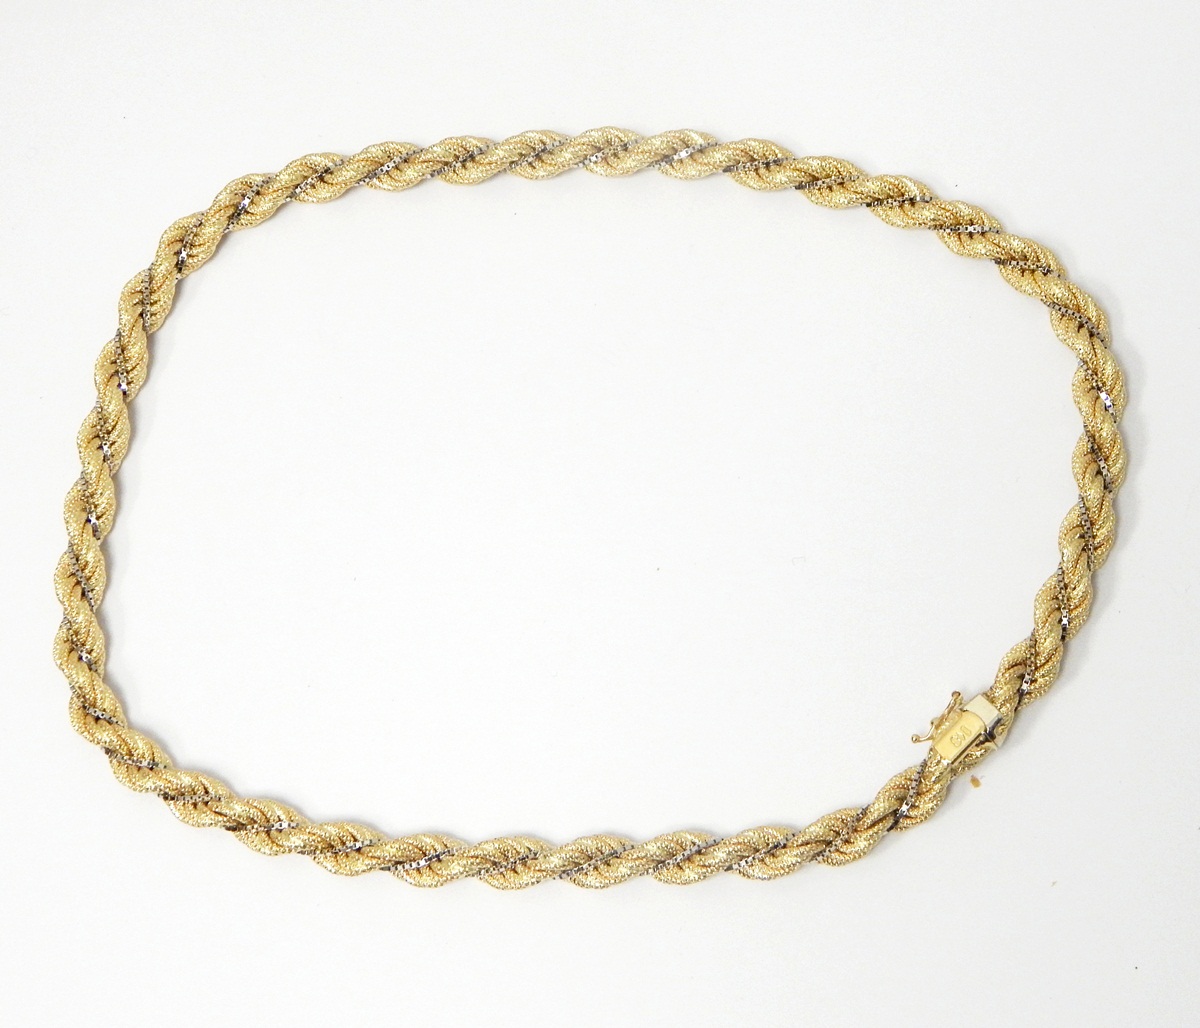 Gold rope-twist necklace, - Image 3 of 4